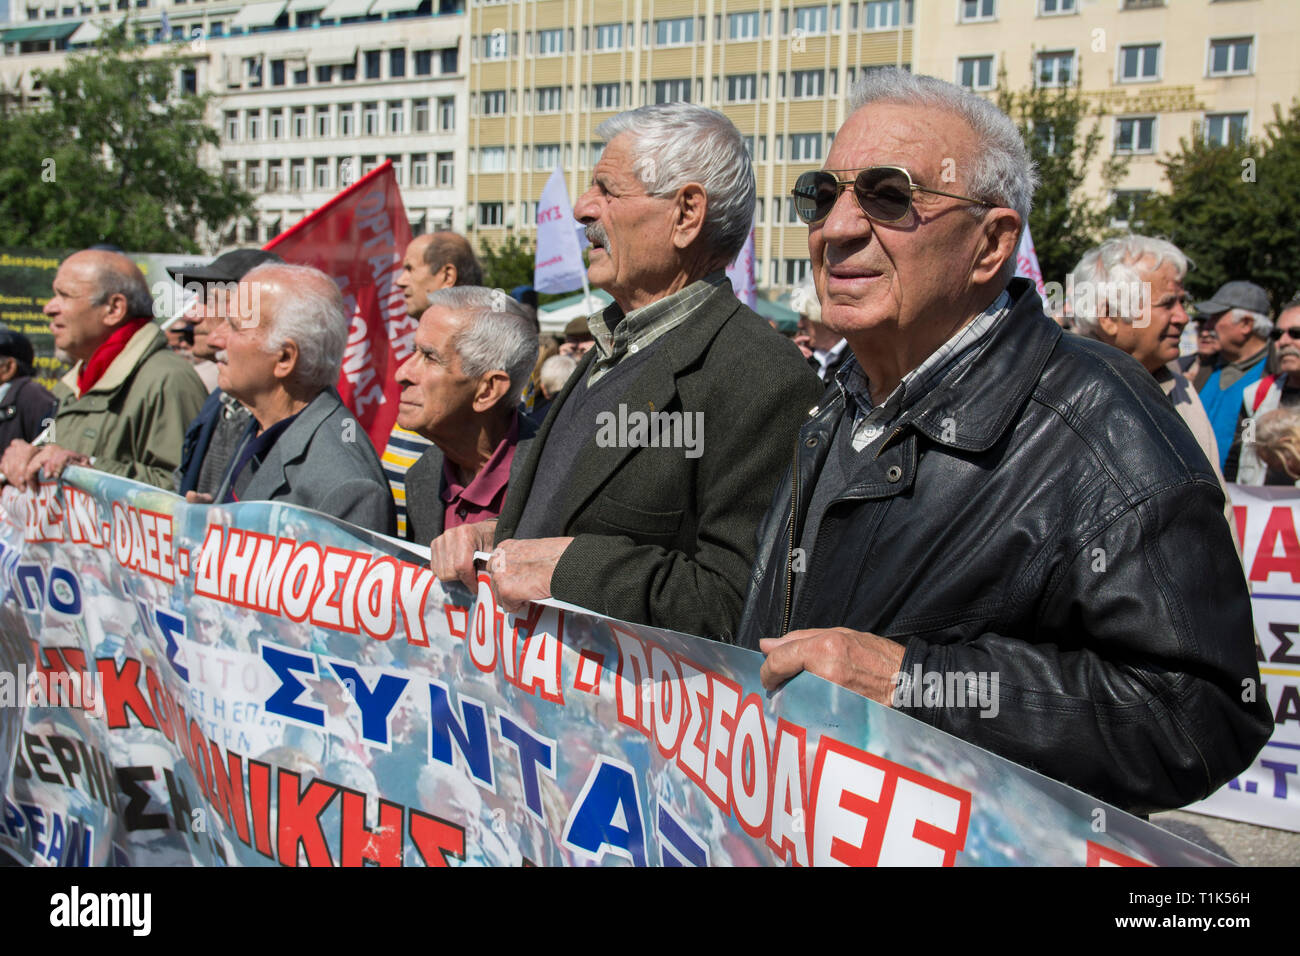 Athens, Greece. 27th Mar 2019. Pensioners march to the prime minister's office at Maximos Mansion shouting slogans against austerity and cuts in social security. Pensioners' unions took to the streets to protest over pension cuts and demand return of their slashed pensions, as their income has been shrinking since Greece entered the bailout deals in 2010. Credit: Nikolas Georgiou/Alamy Live News Stock Photo